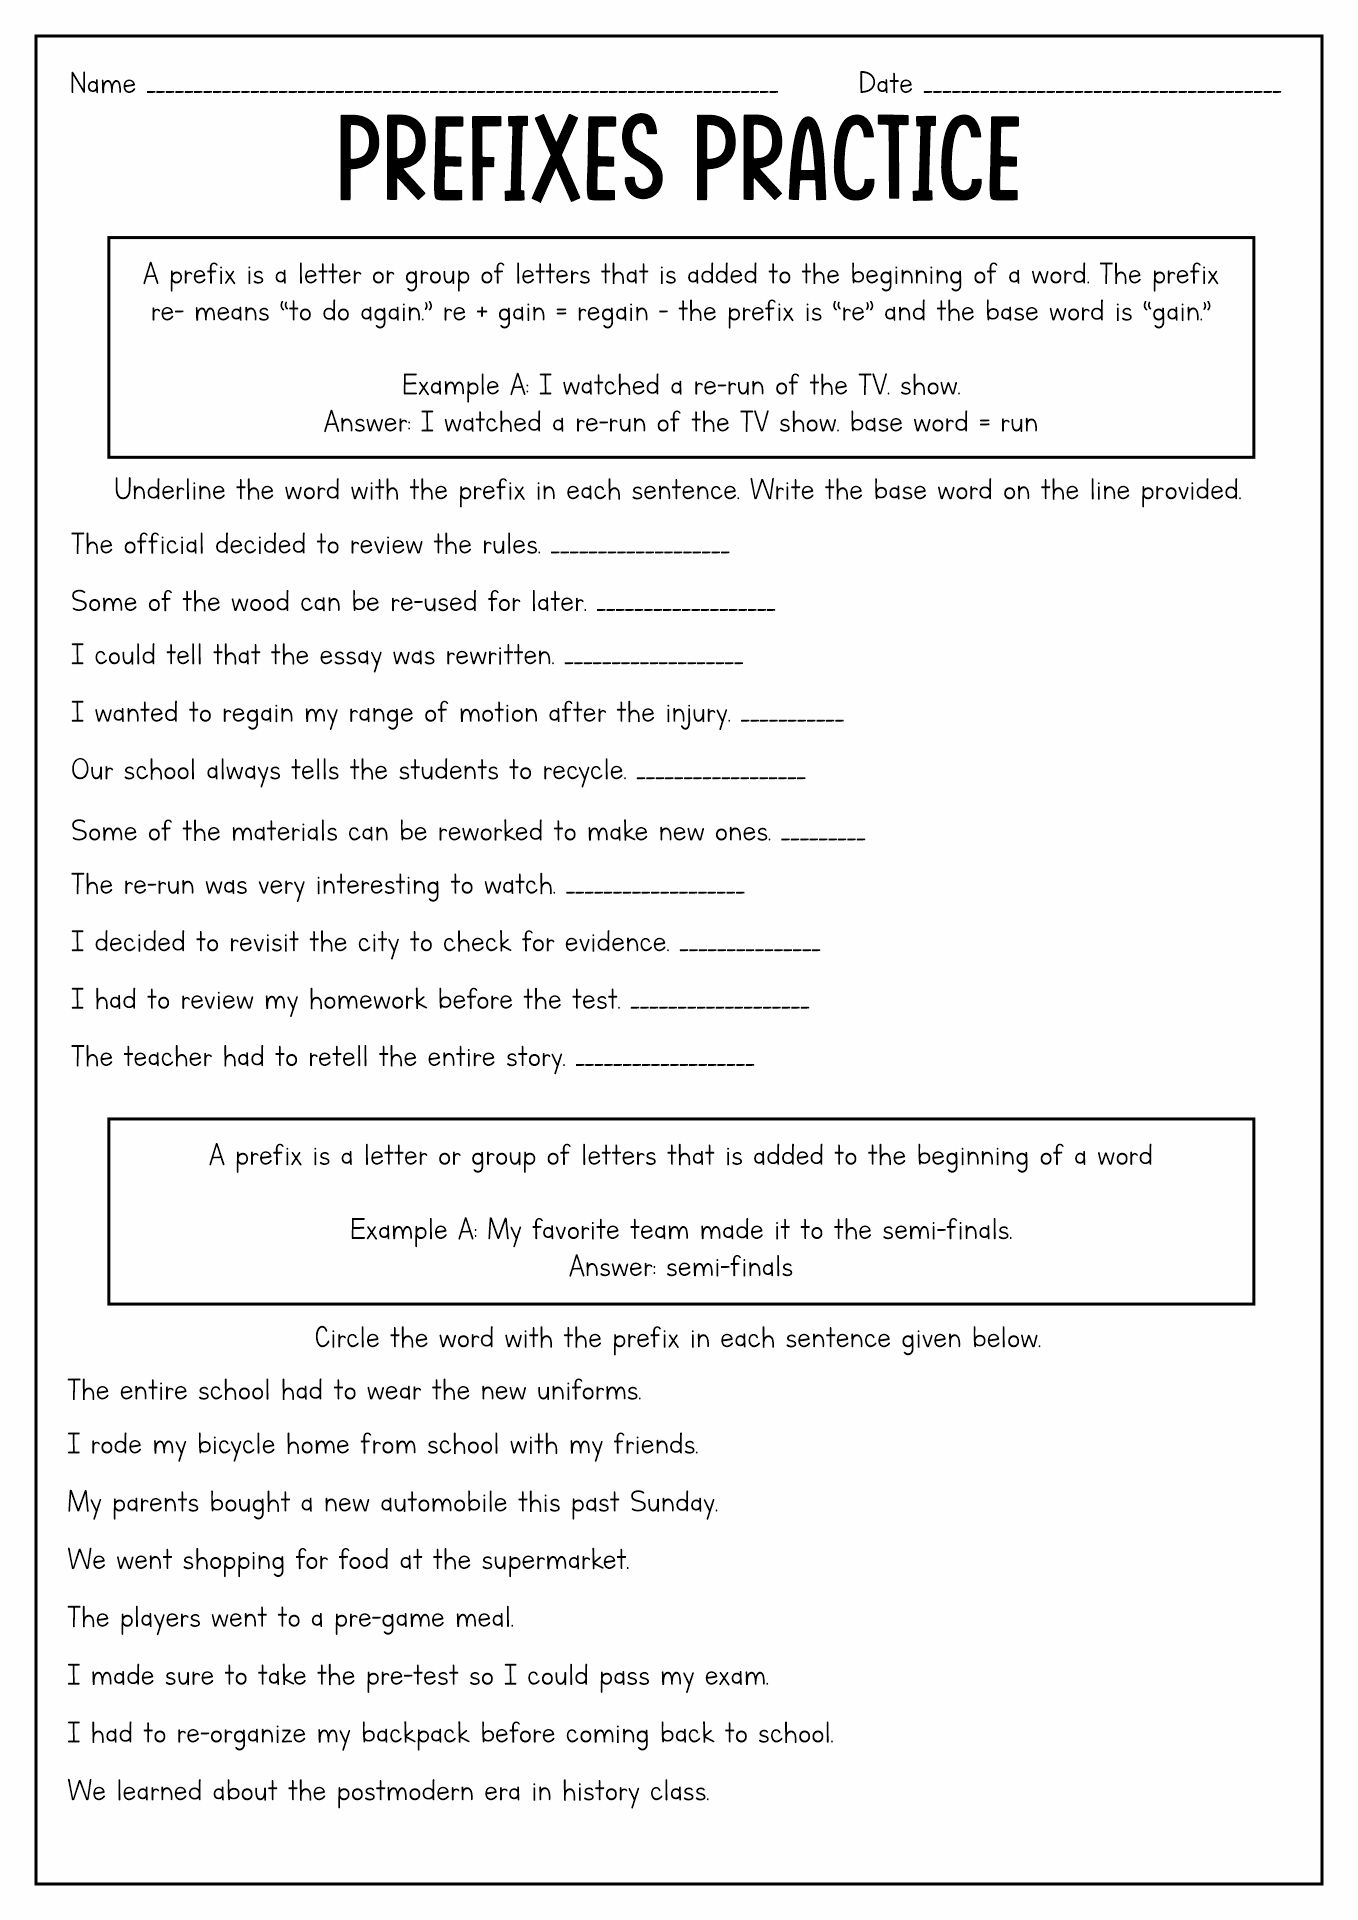 14-best-images-of-prefixes-suffixes-root-words-worksheets-latin-roots-prefixes-and-suffixes